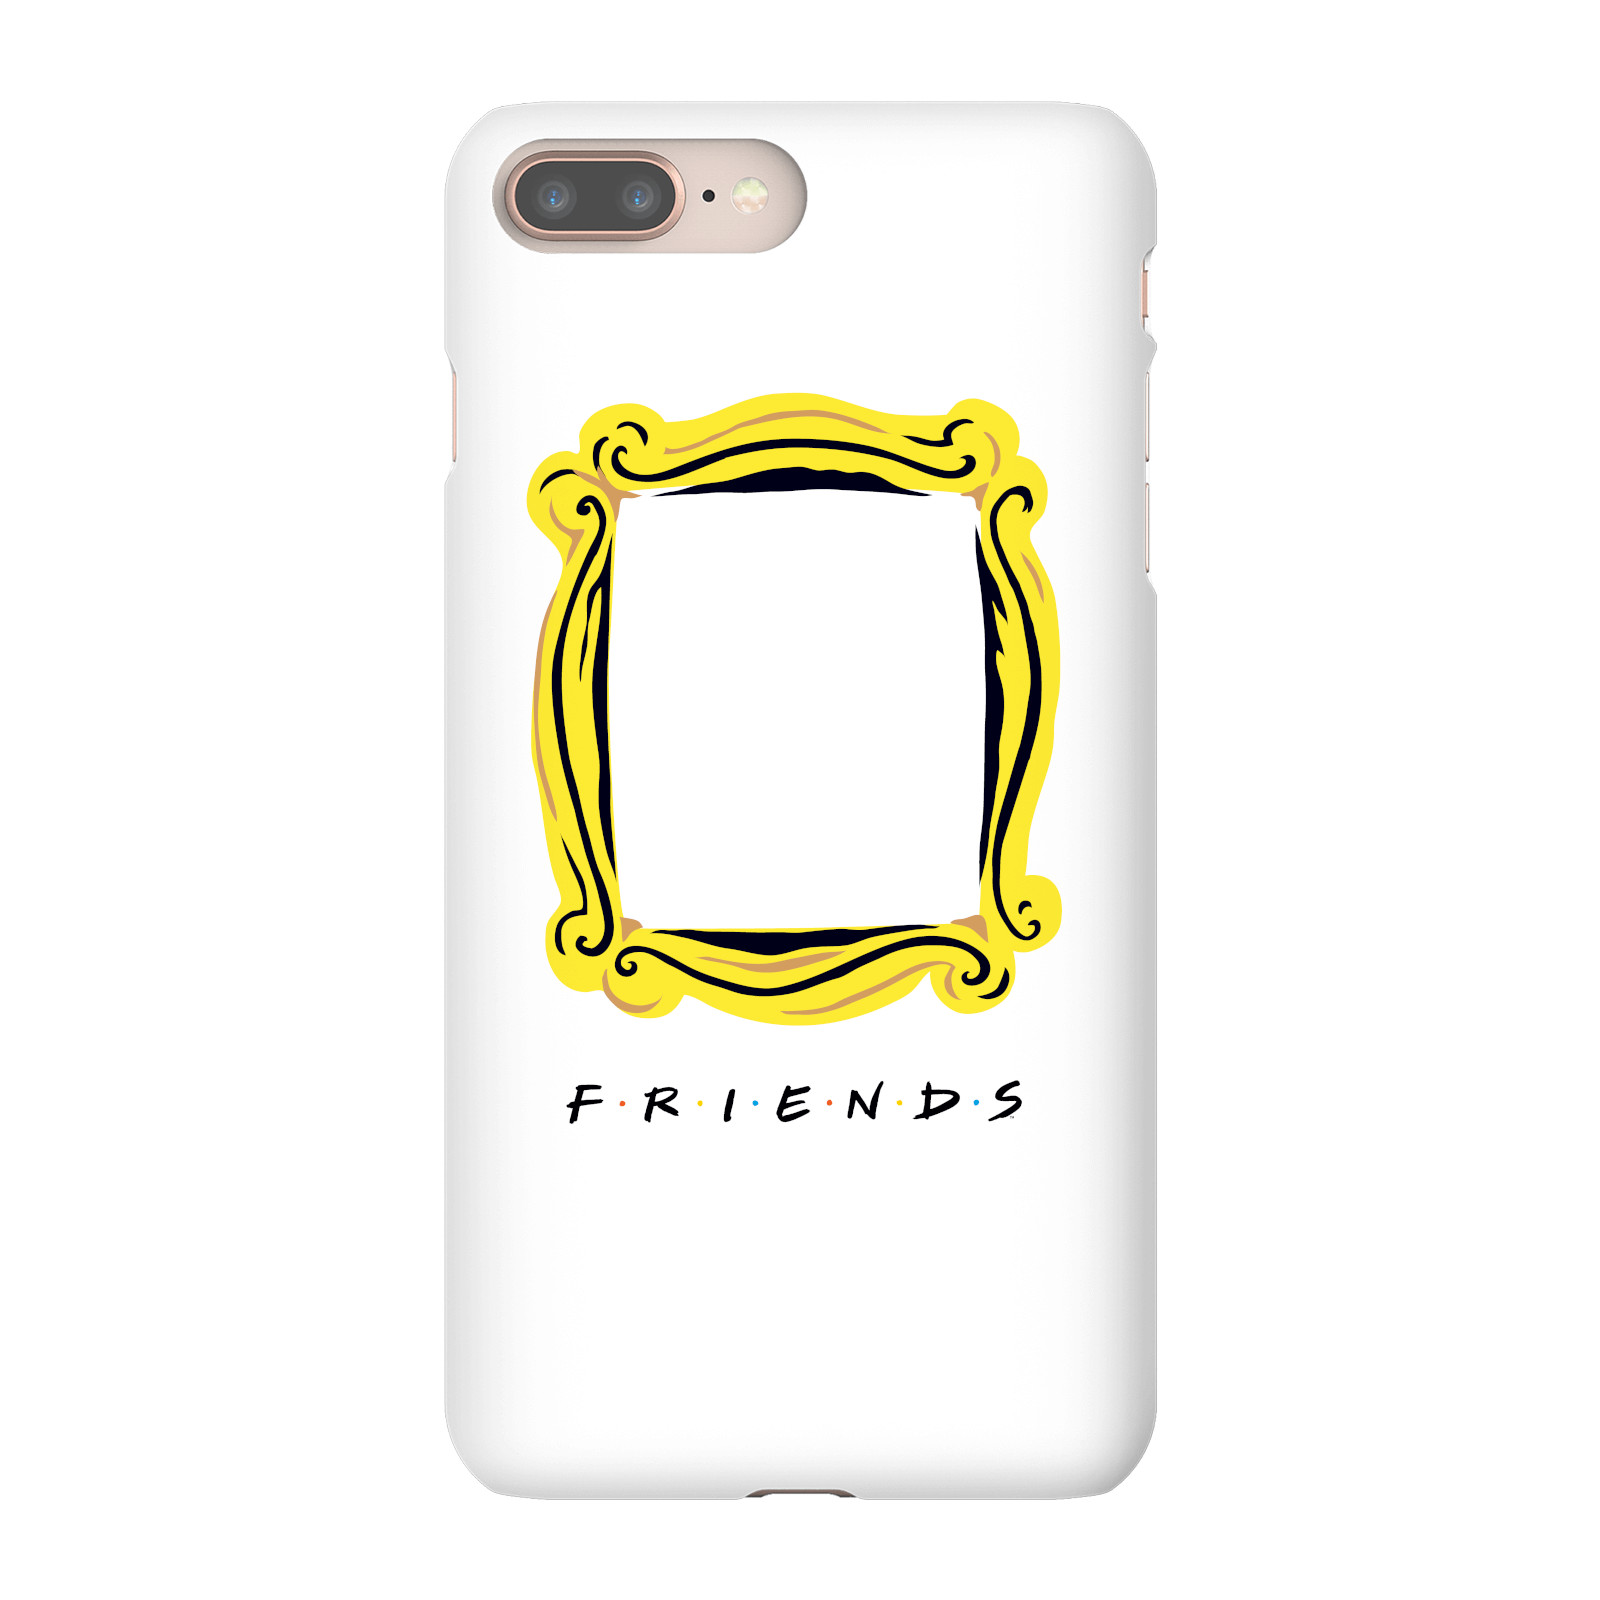 Photos - Other for Mobile Frame Friends  Phone Case for iPhone and Android - Samsung S6 - Snap Case  